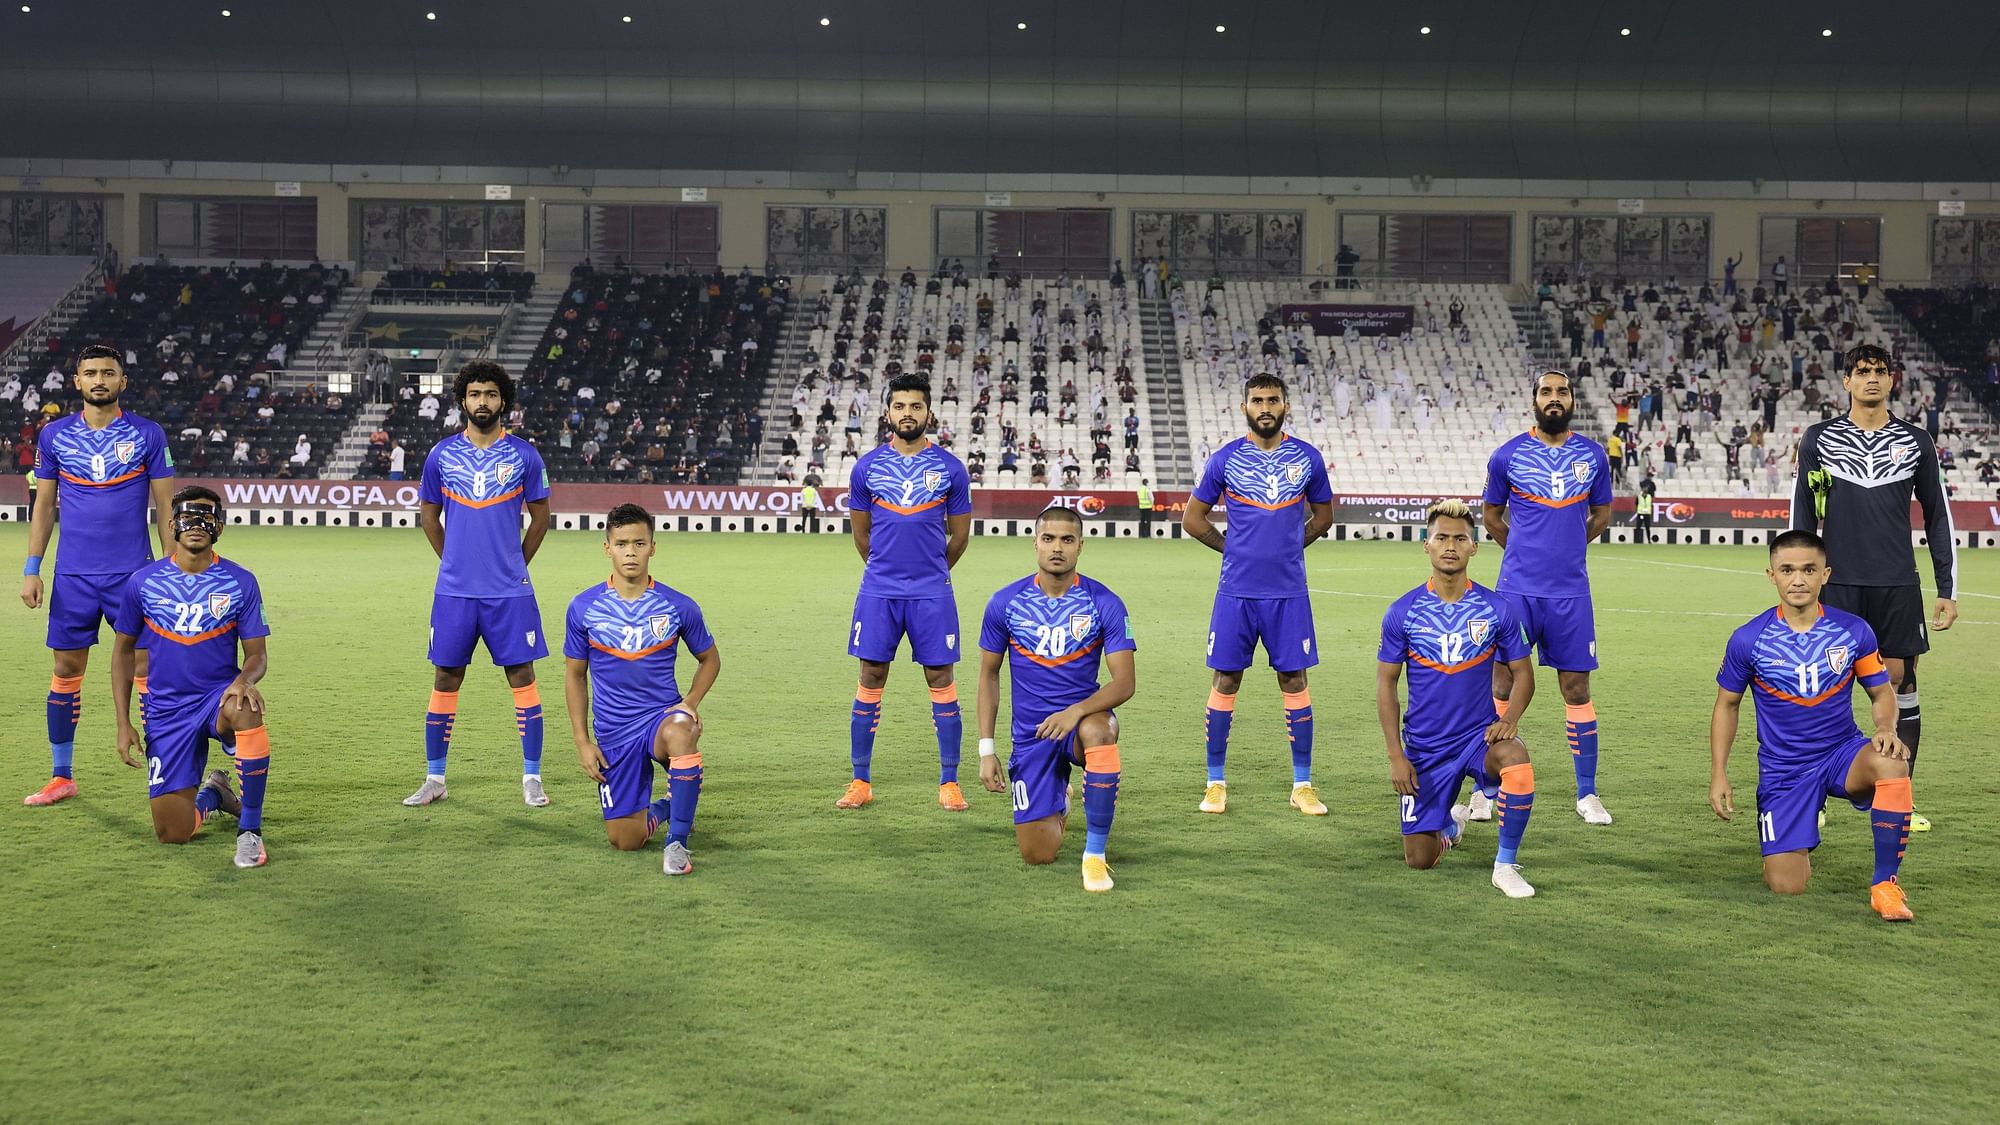 Indian men’s football team pose for a picture ahead of their game against Qatar